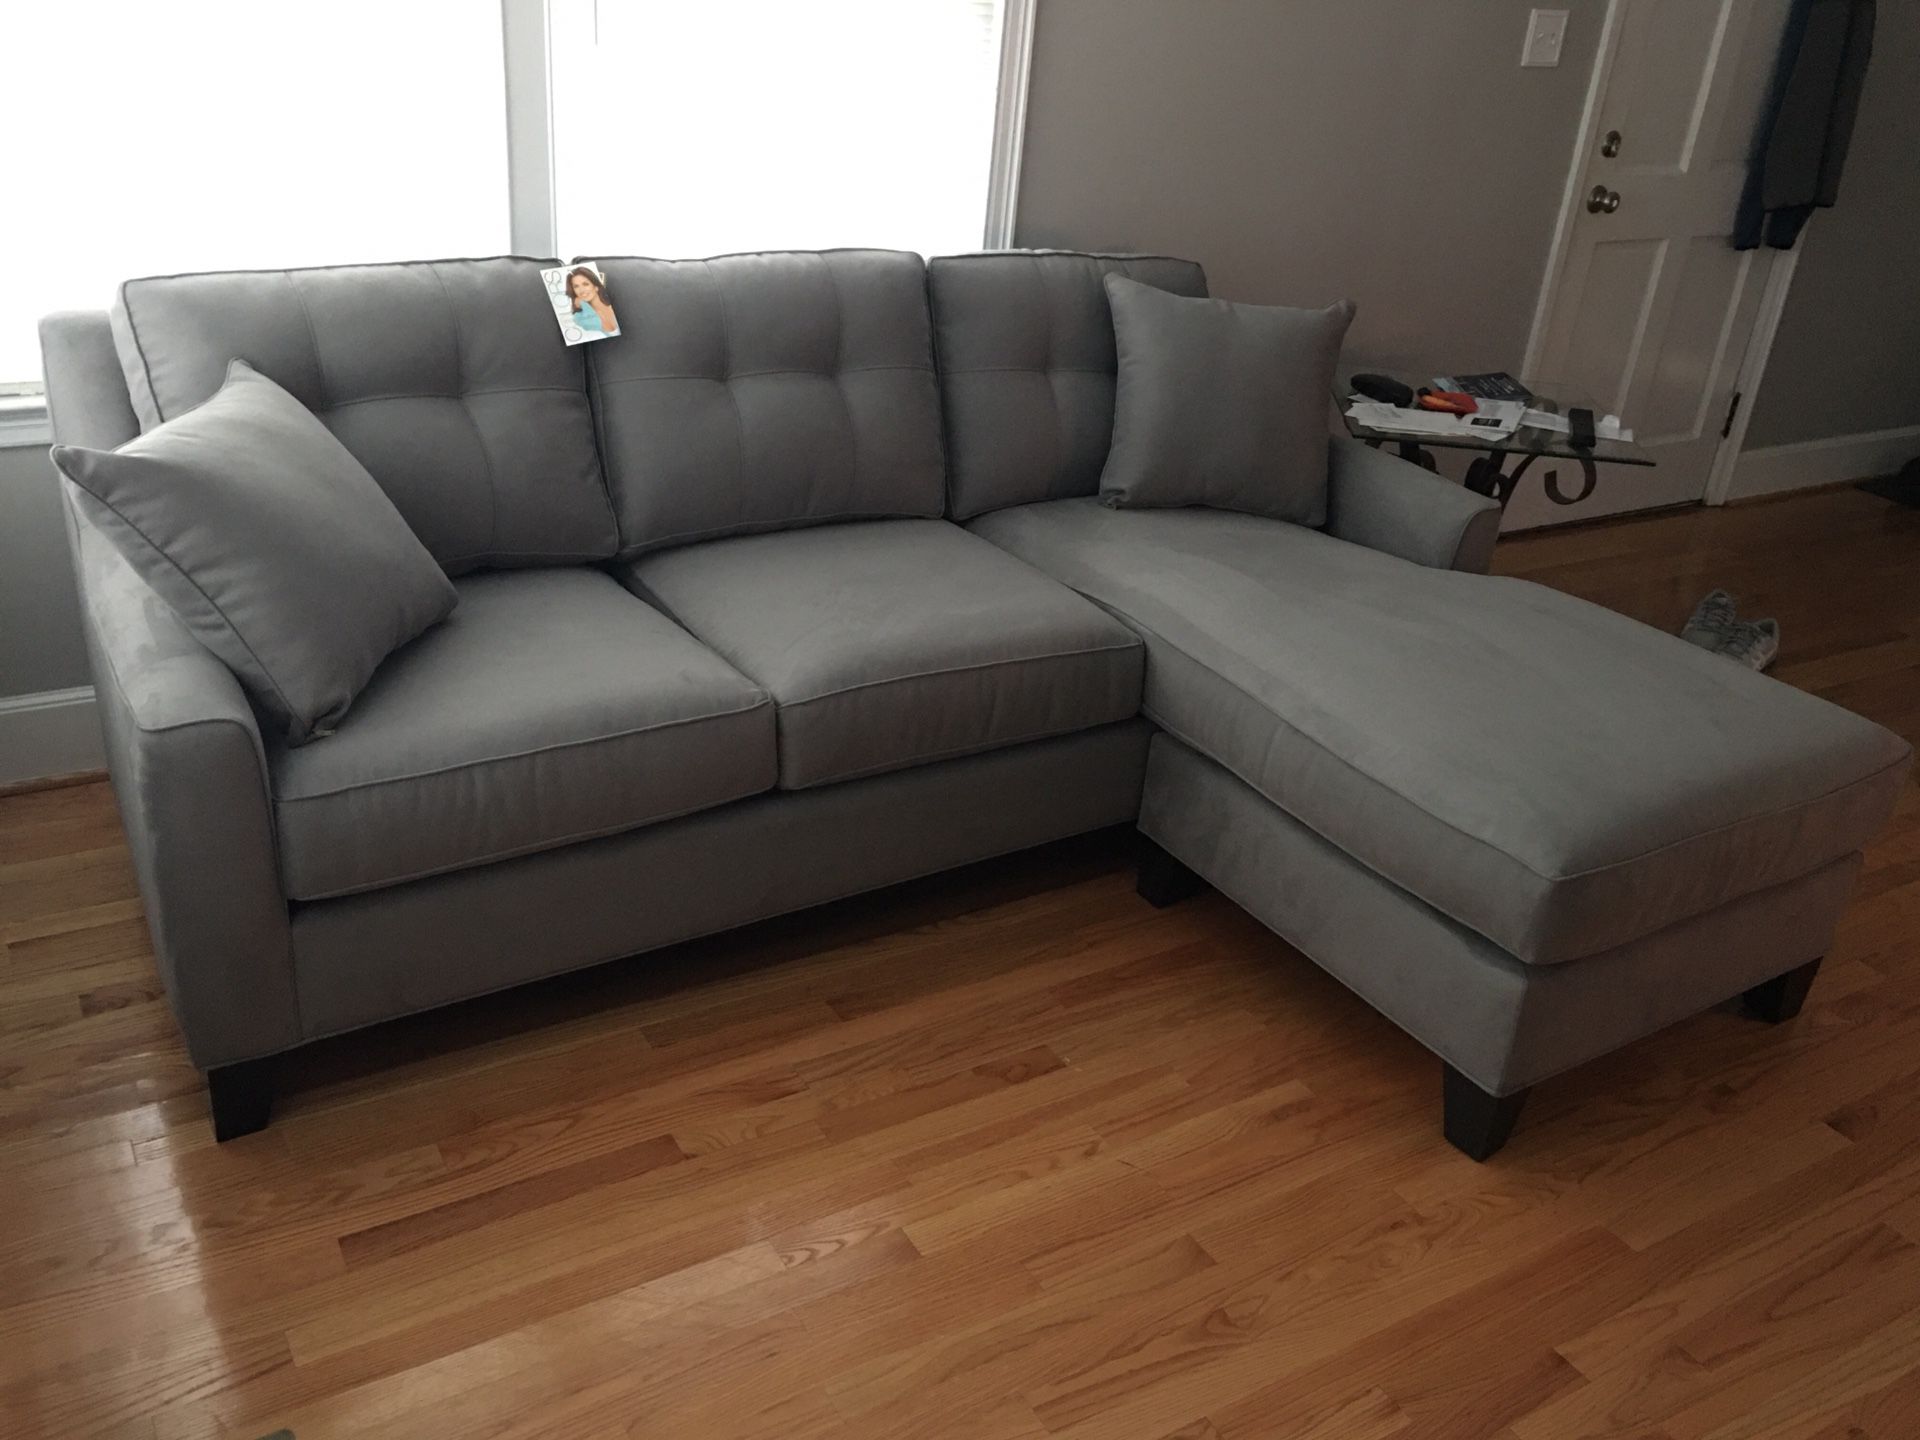 Lke New sectional couch sofa color gray